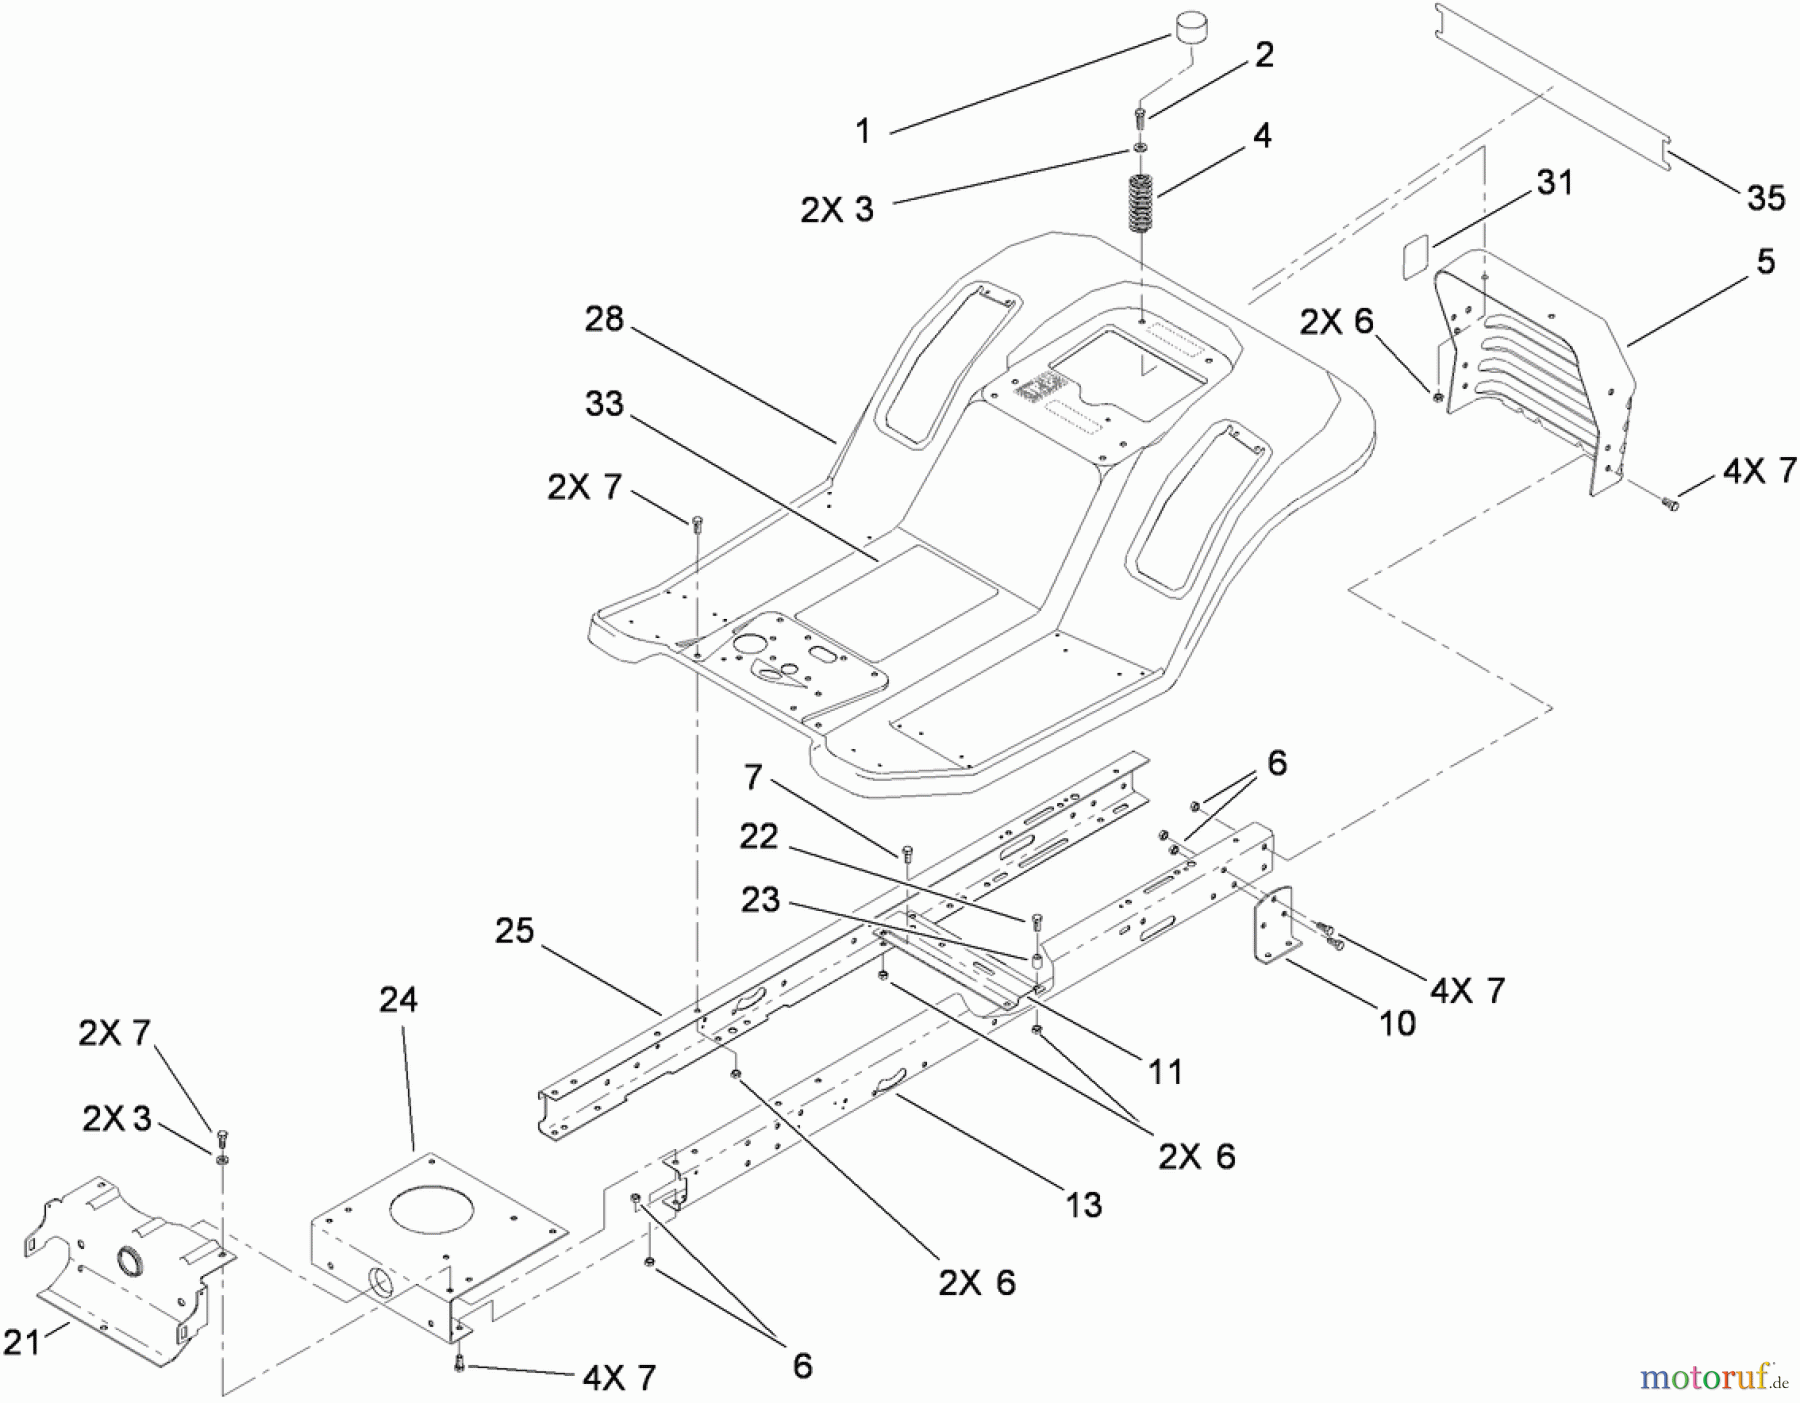  Toro Neu Mowers, Lawn & Garden Tractor Seite 1 71252 (XL 380H) - Toro XL 380H Lawn Tractor, 2010 (310002001-310999999) FRAME AND BODY ASSEMBLY